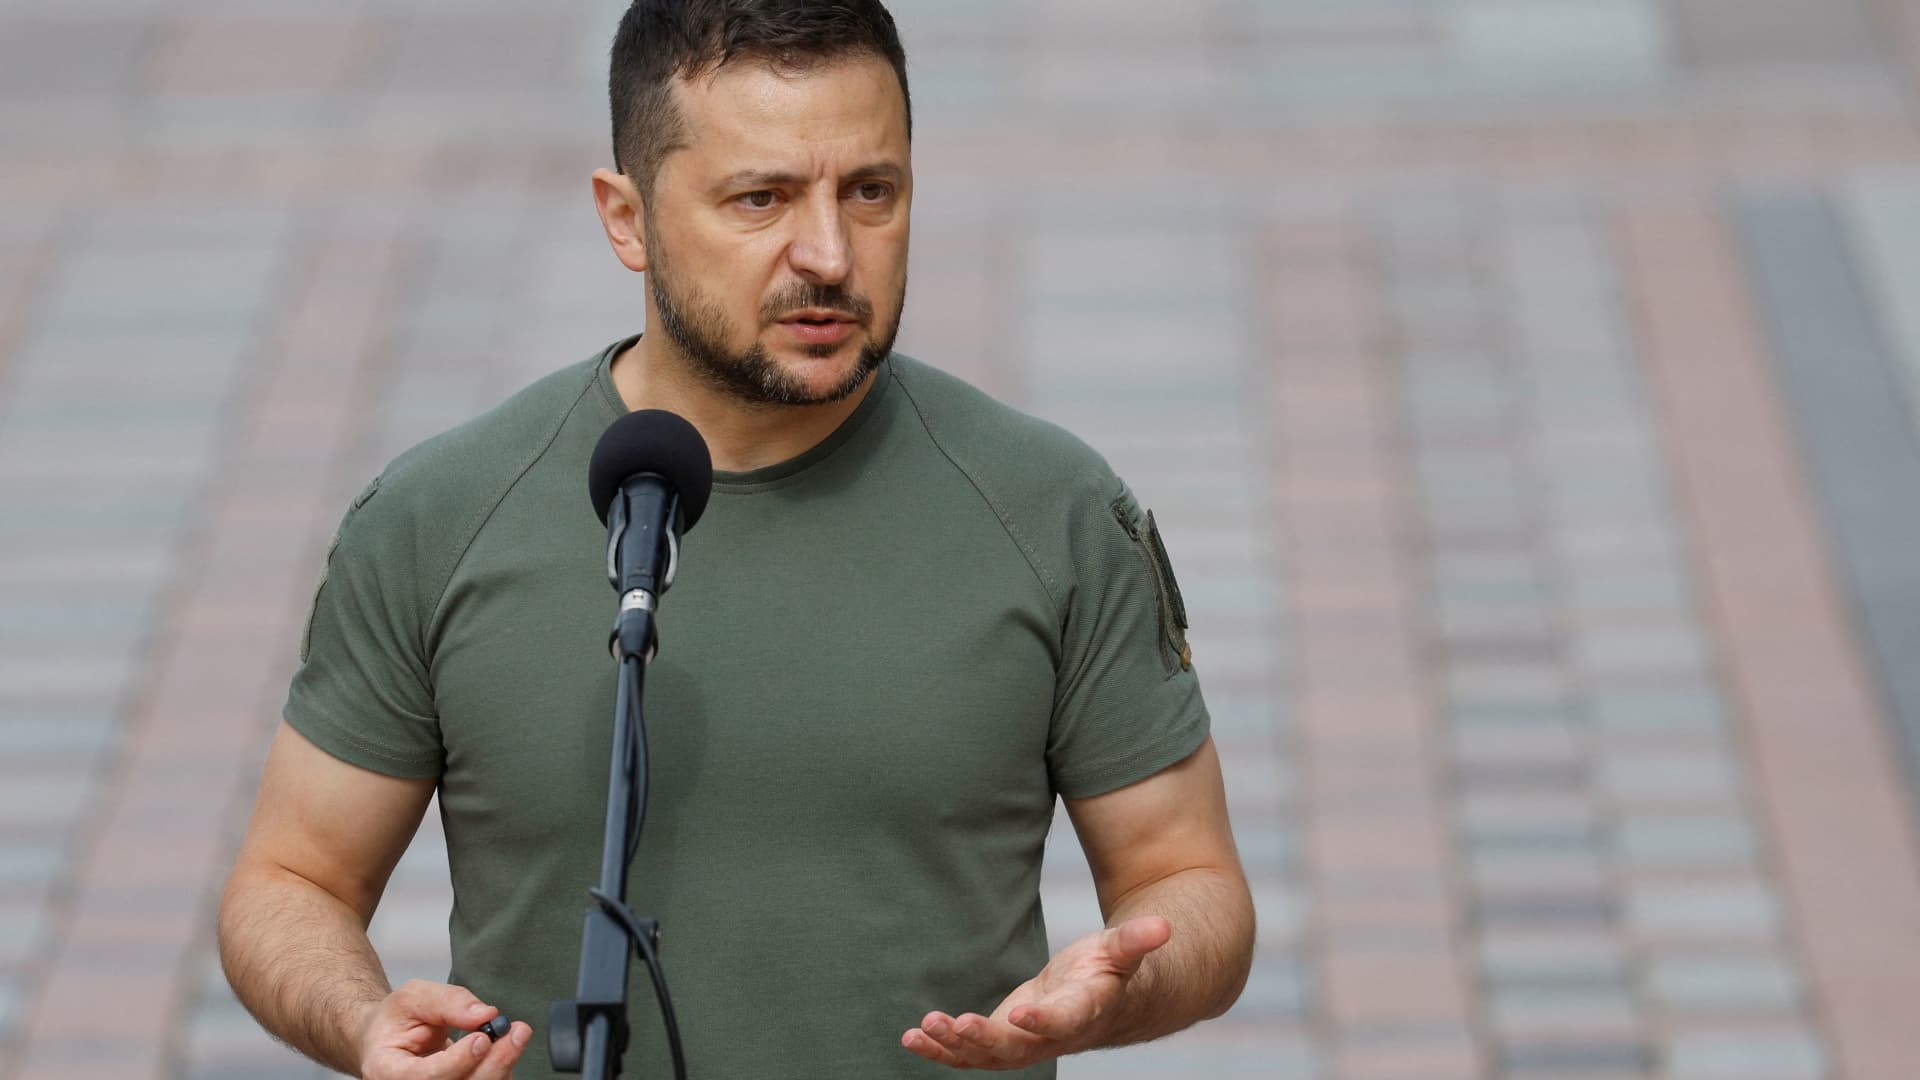 Zelenskyy on Putin’s threat of nuclear weapons: ‘I don’t think he’s bluffing’